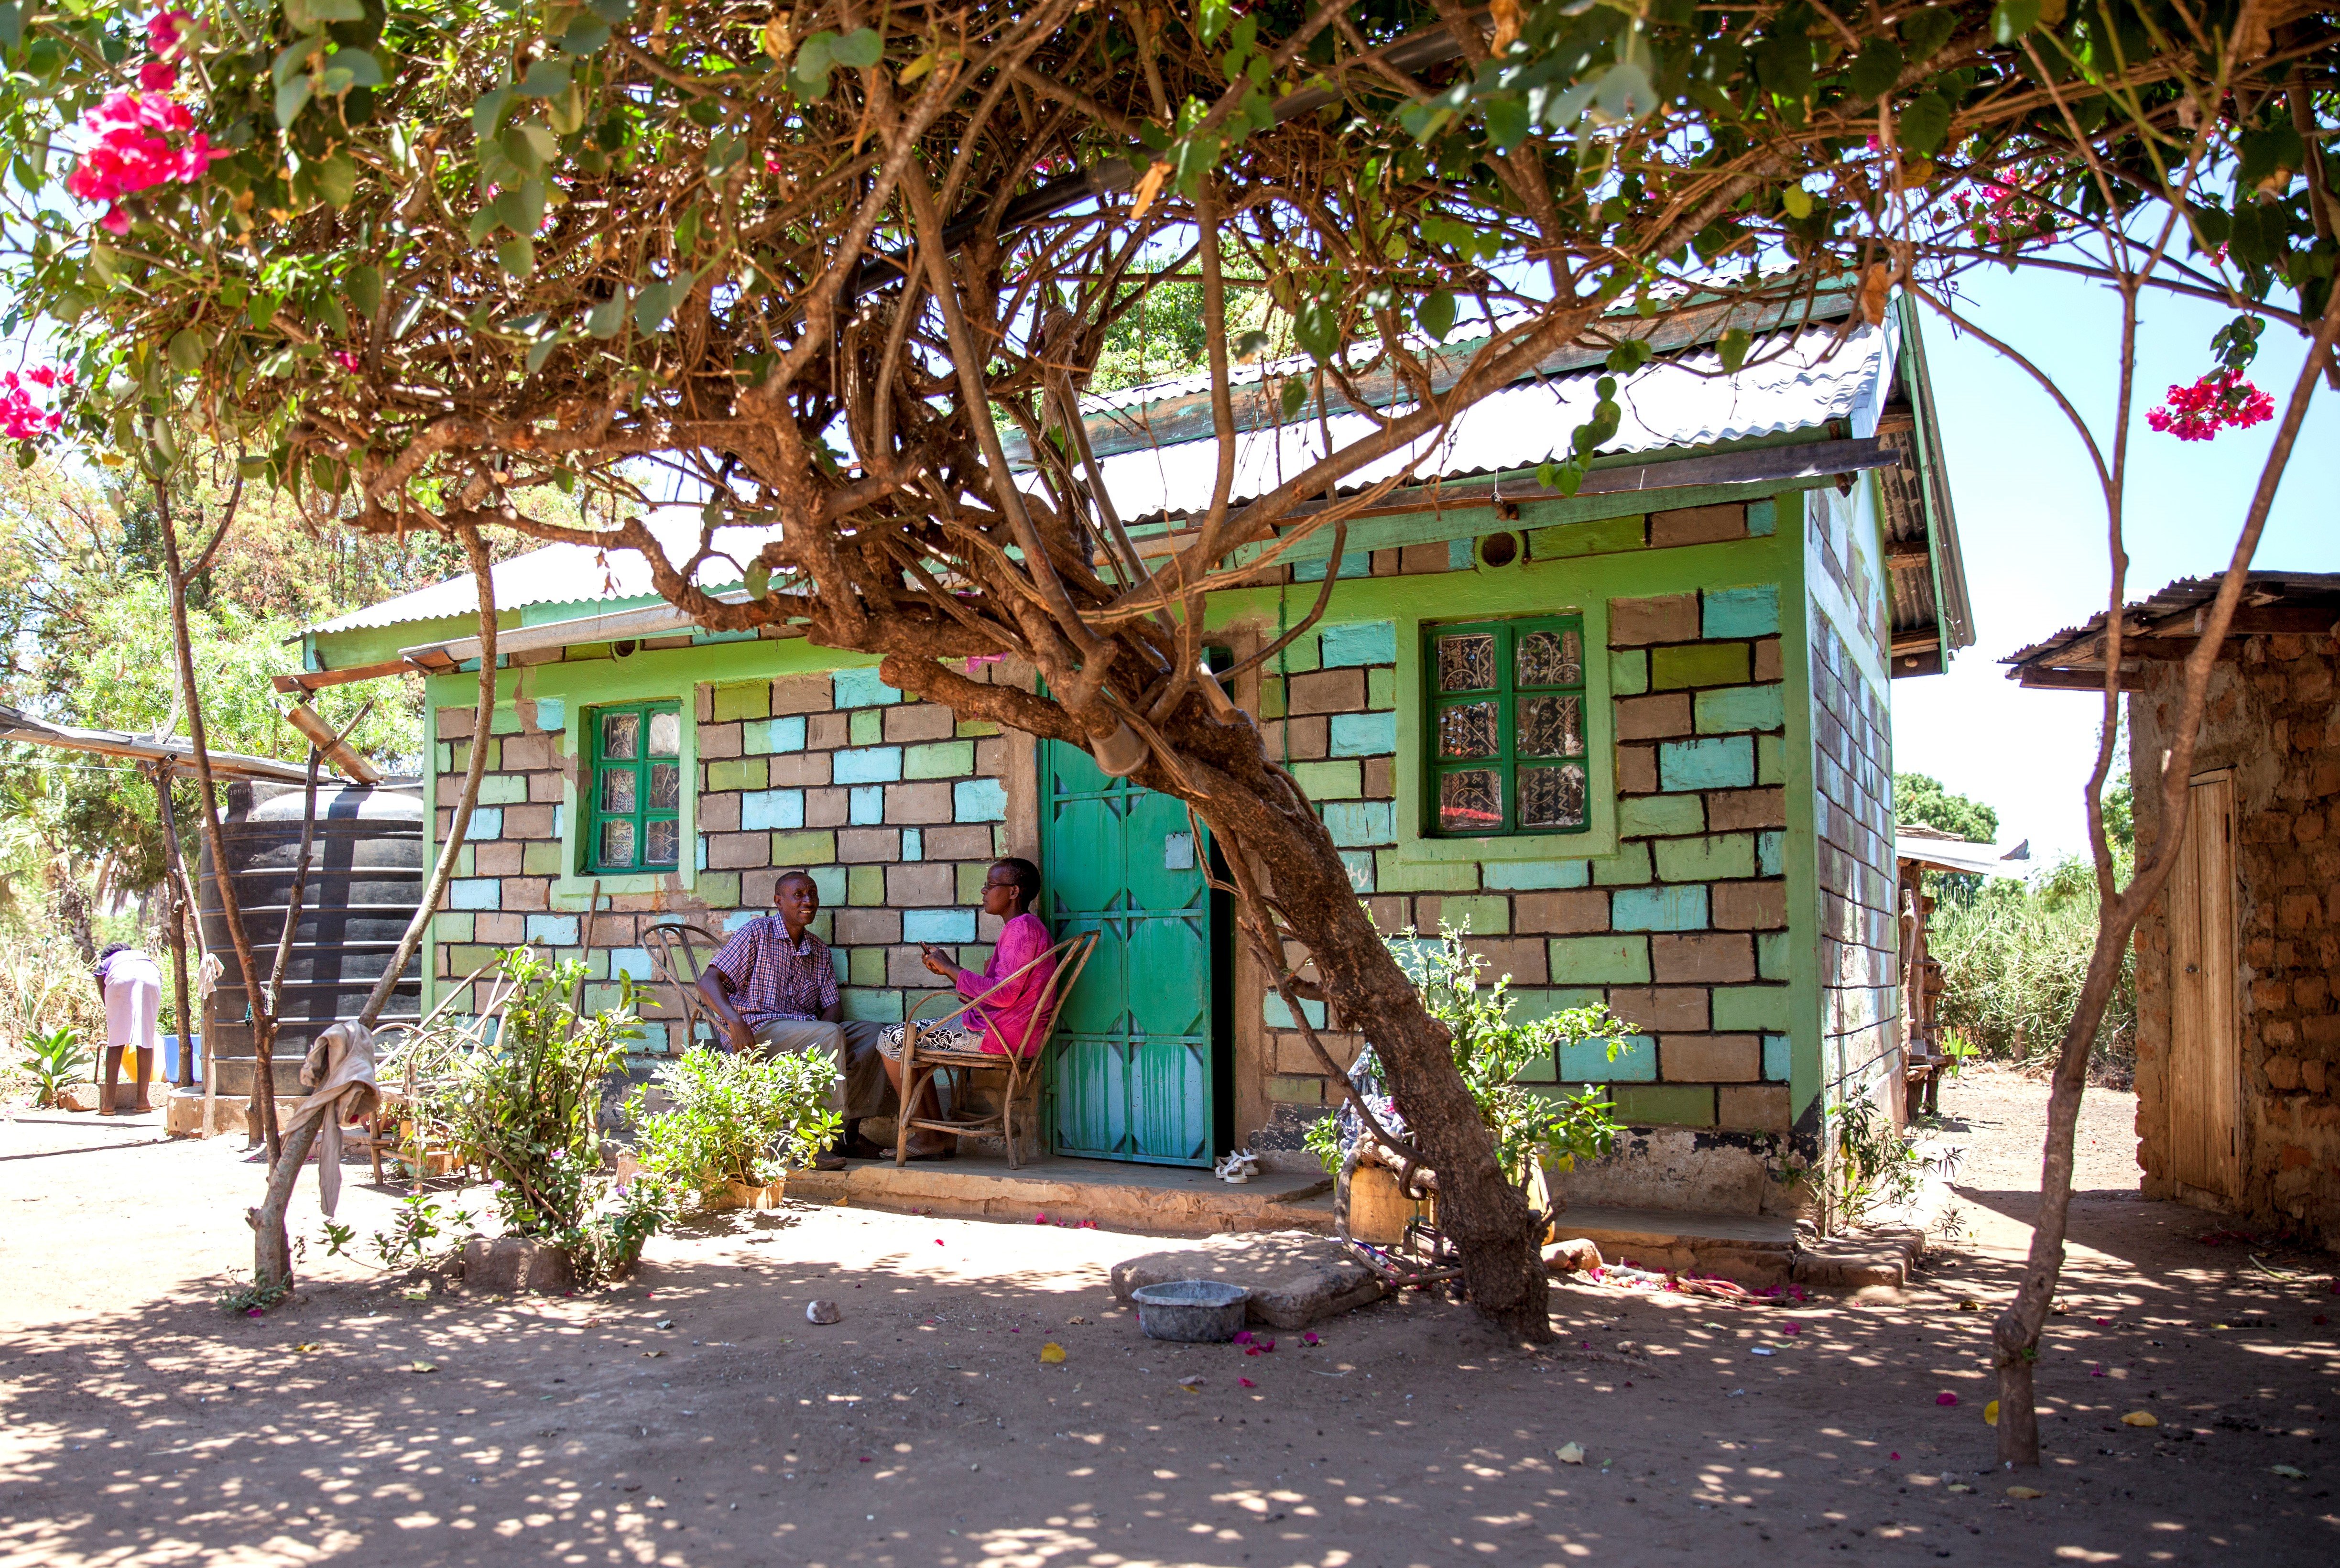 Habitat for Humanity finds Housing Microfinance helps improve living conditions in Kenya